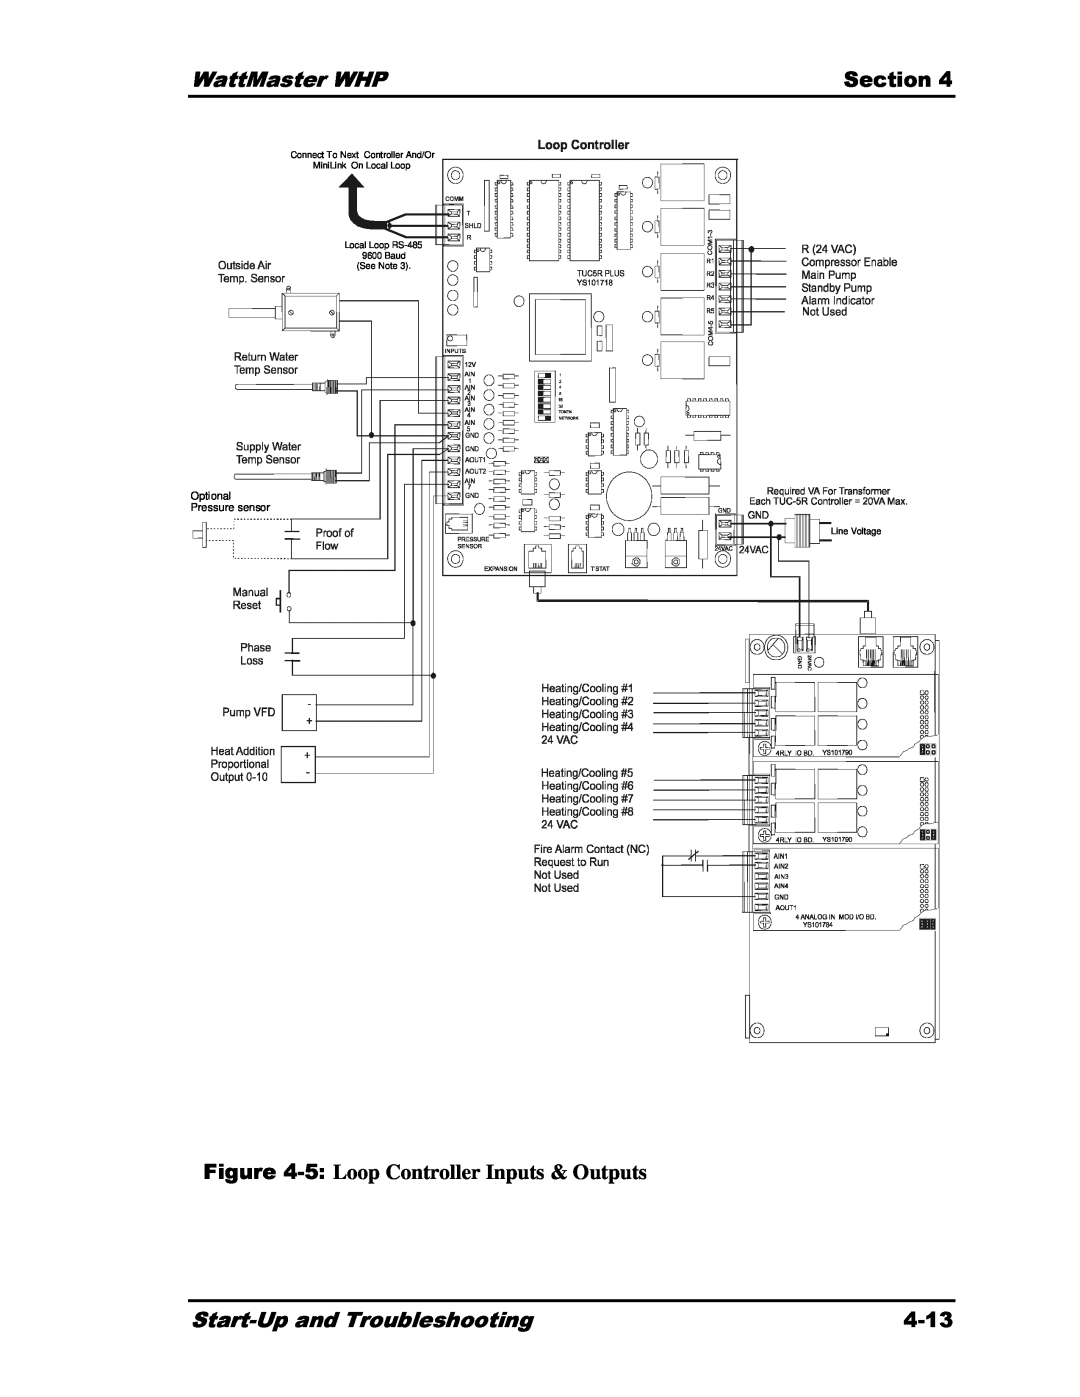 Heat Controller Water Source Heat Pump WattMaster WHP, Section, 5: Loop Controller Inputs & Outputs, 4-13, Baud See Note 